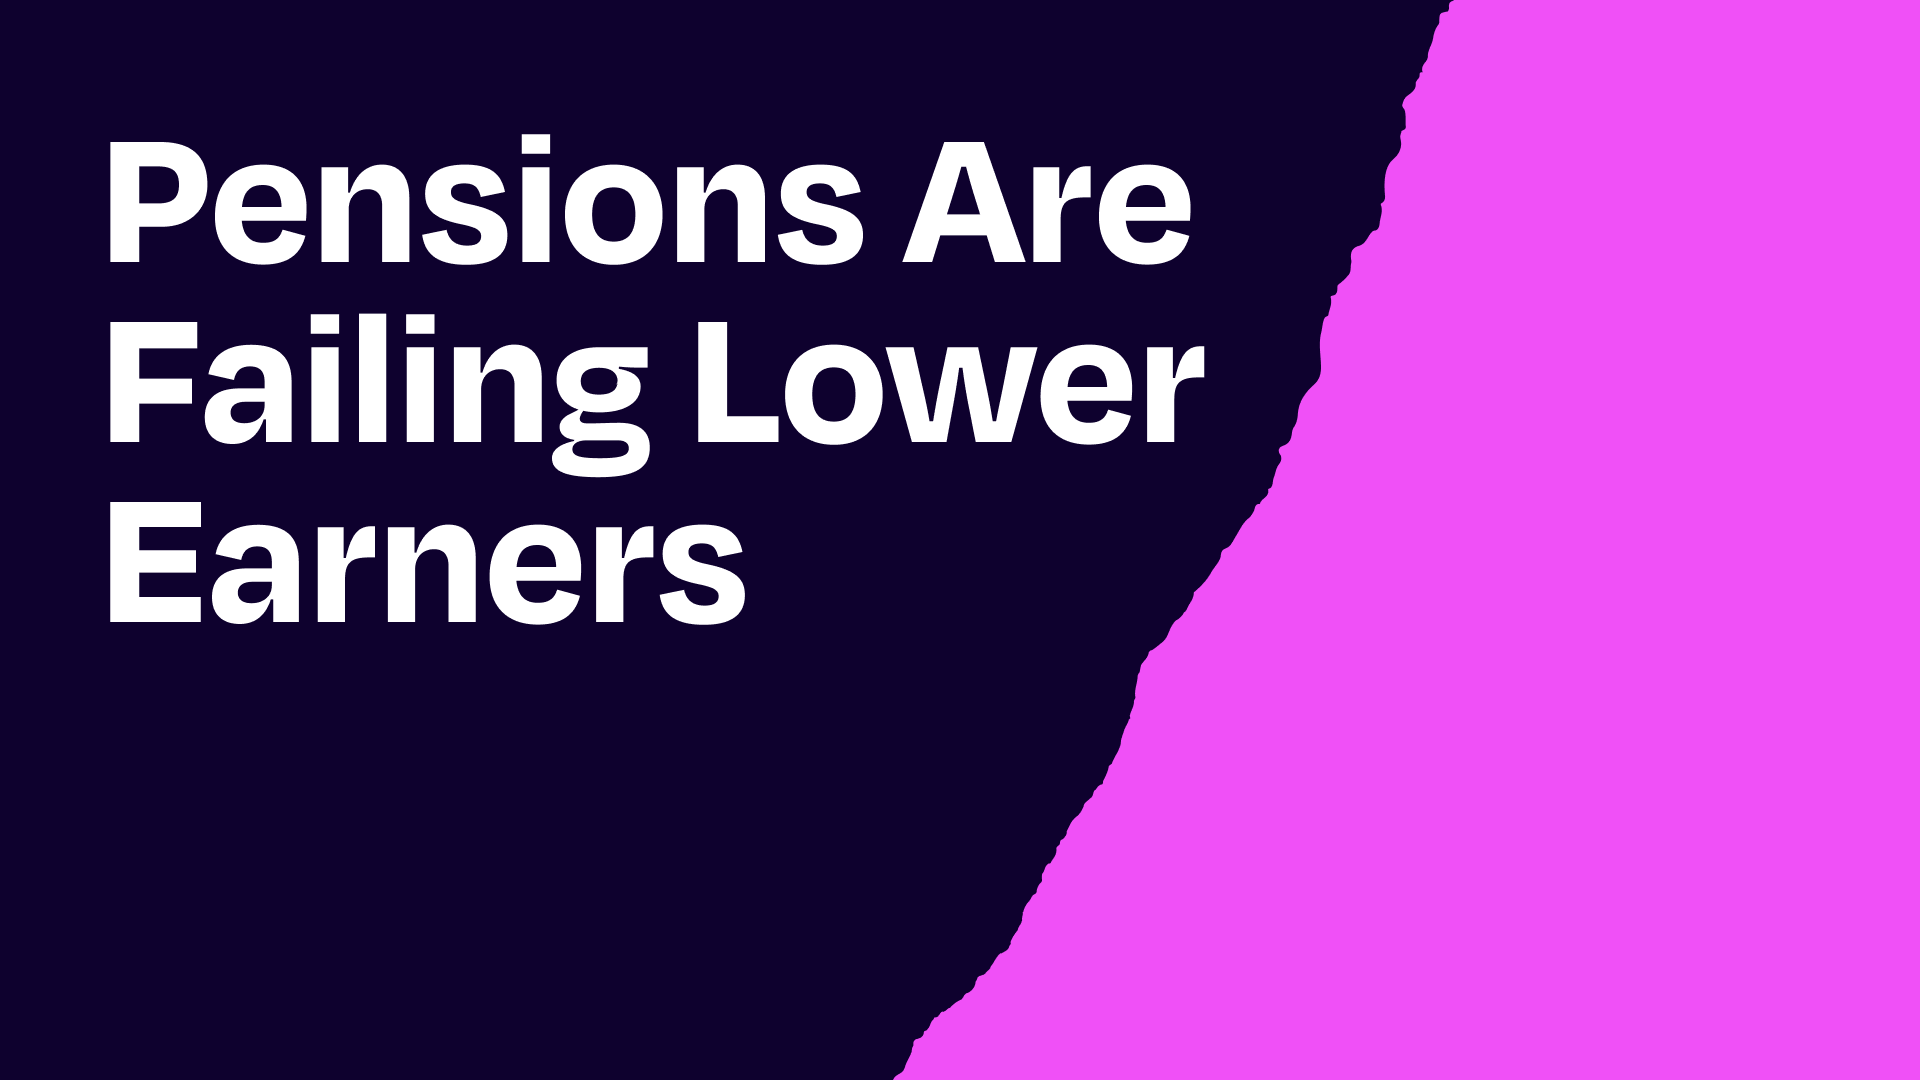 Why workplace pensions are still failing lower earners